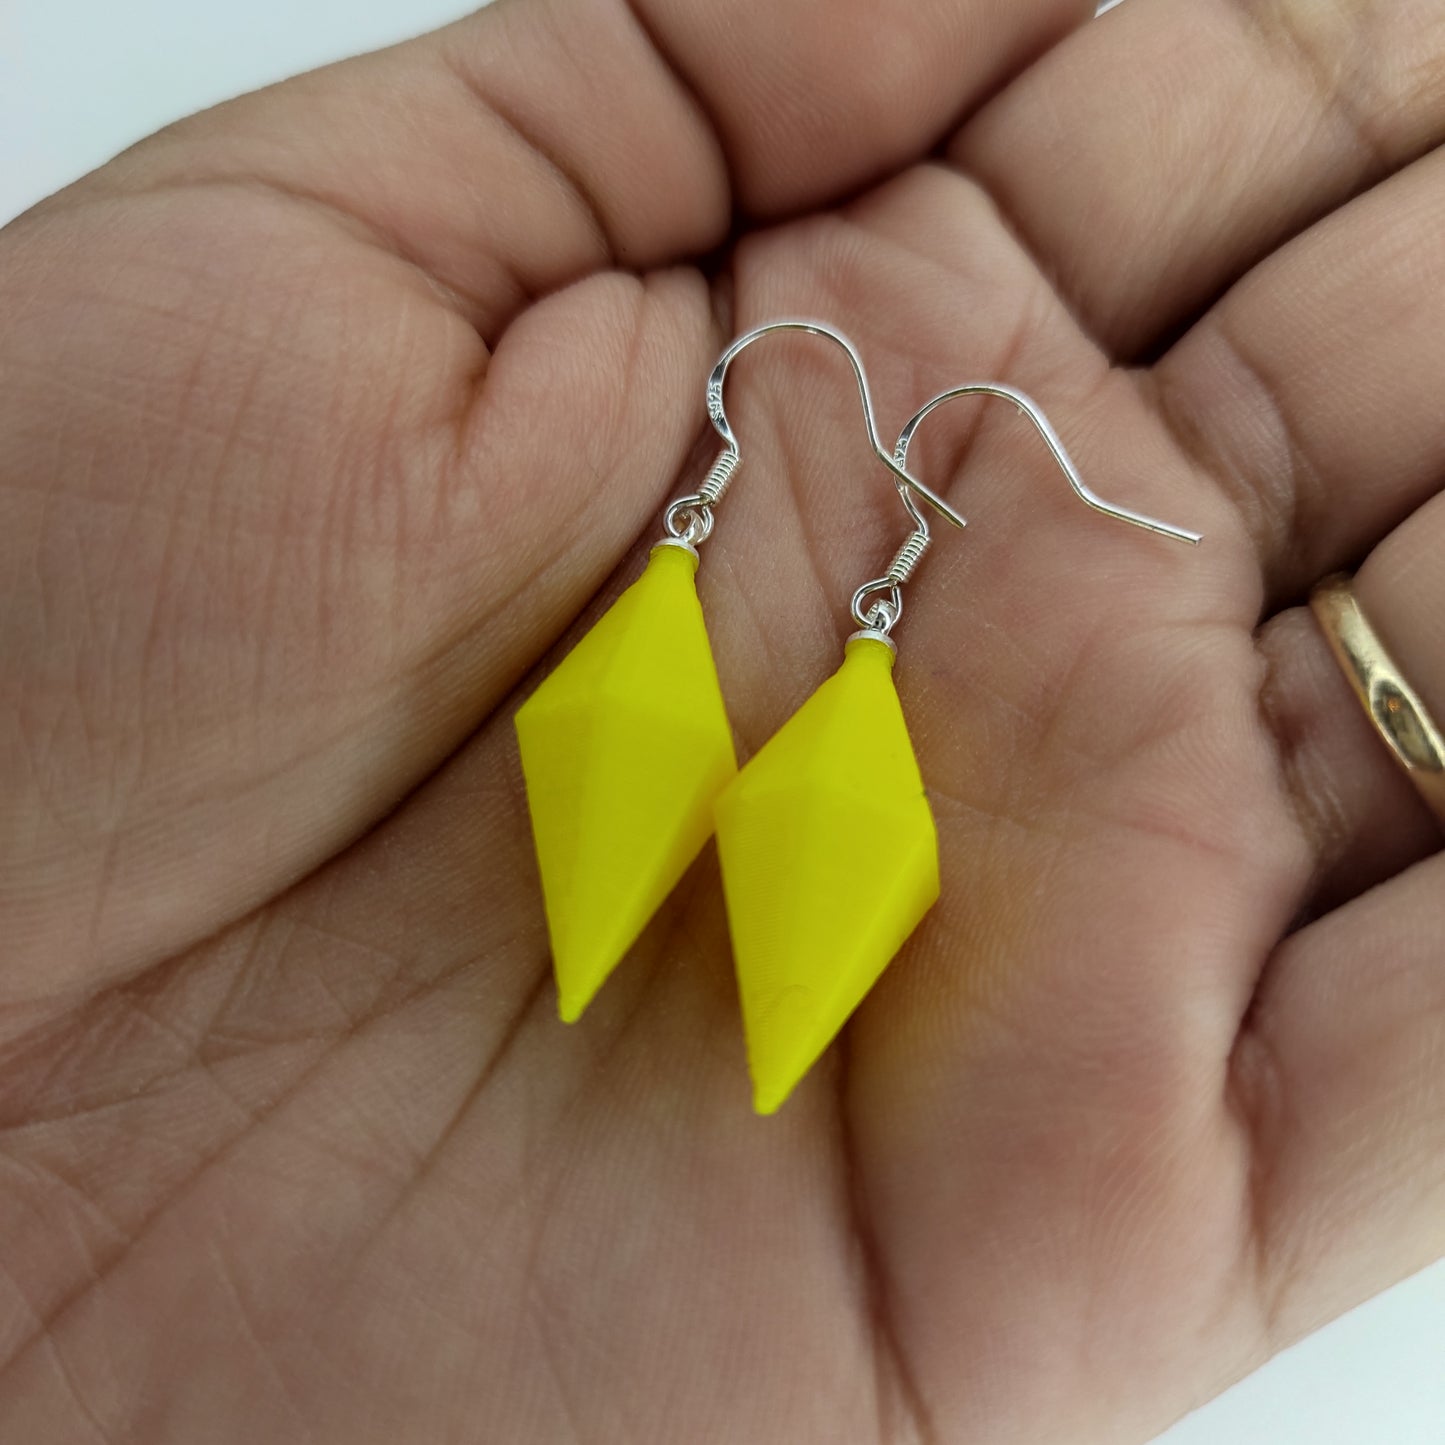 Plumbob Earrings / ALL COLOURS AVAILABLE / The Sims / Accessories / Girlfriend Gift